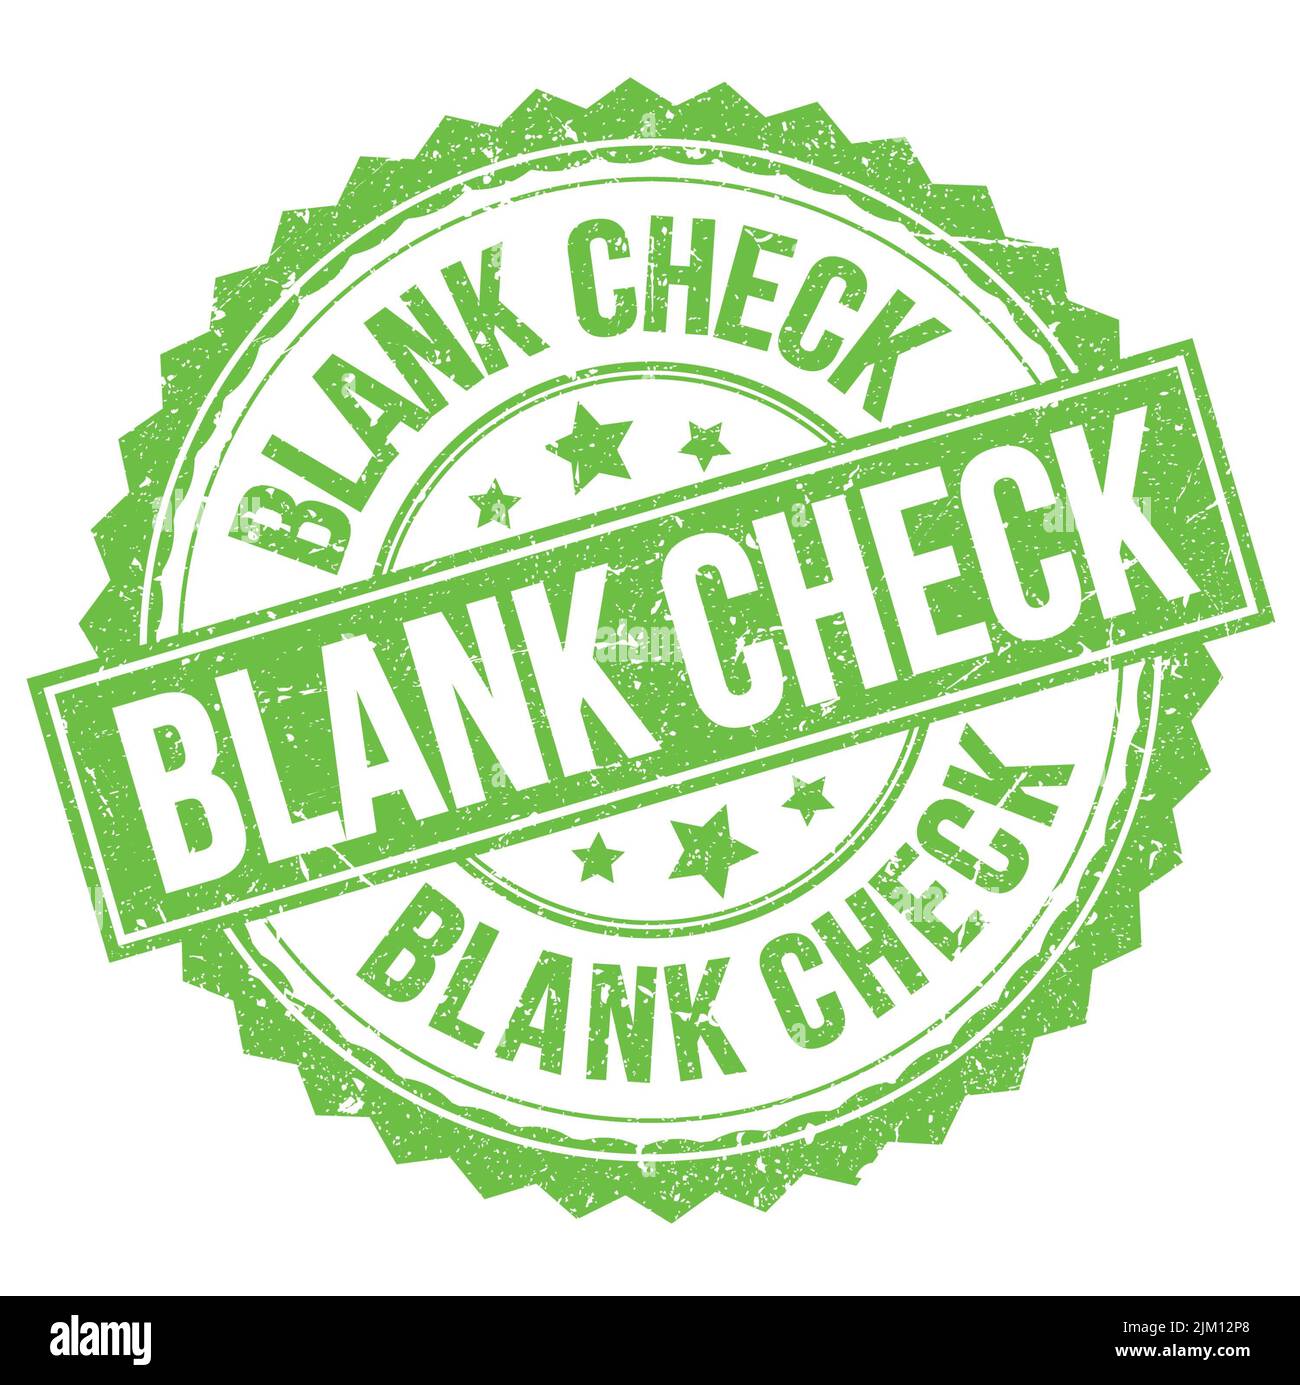 BLANK CHECK text written on green round stamp sign Stock Photo